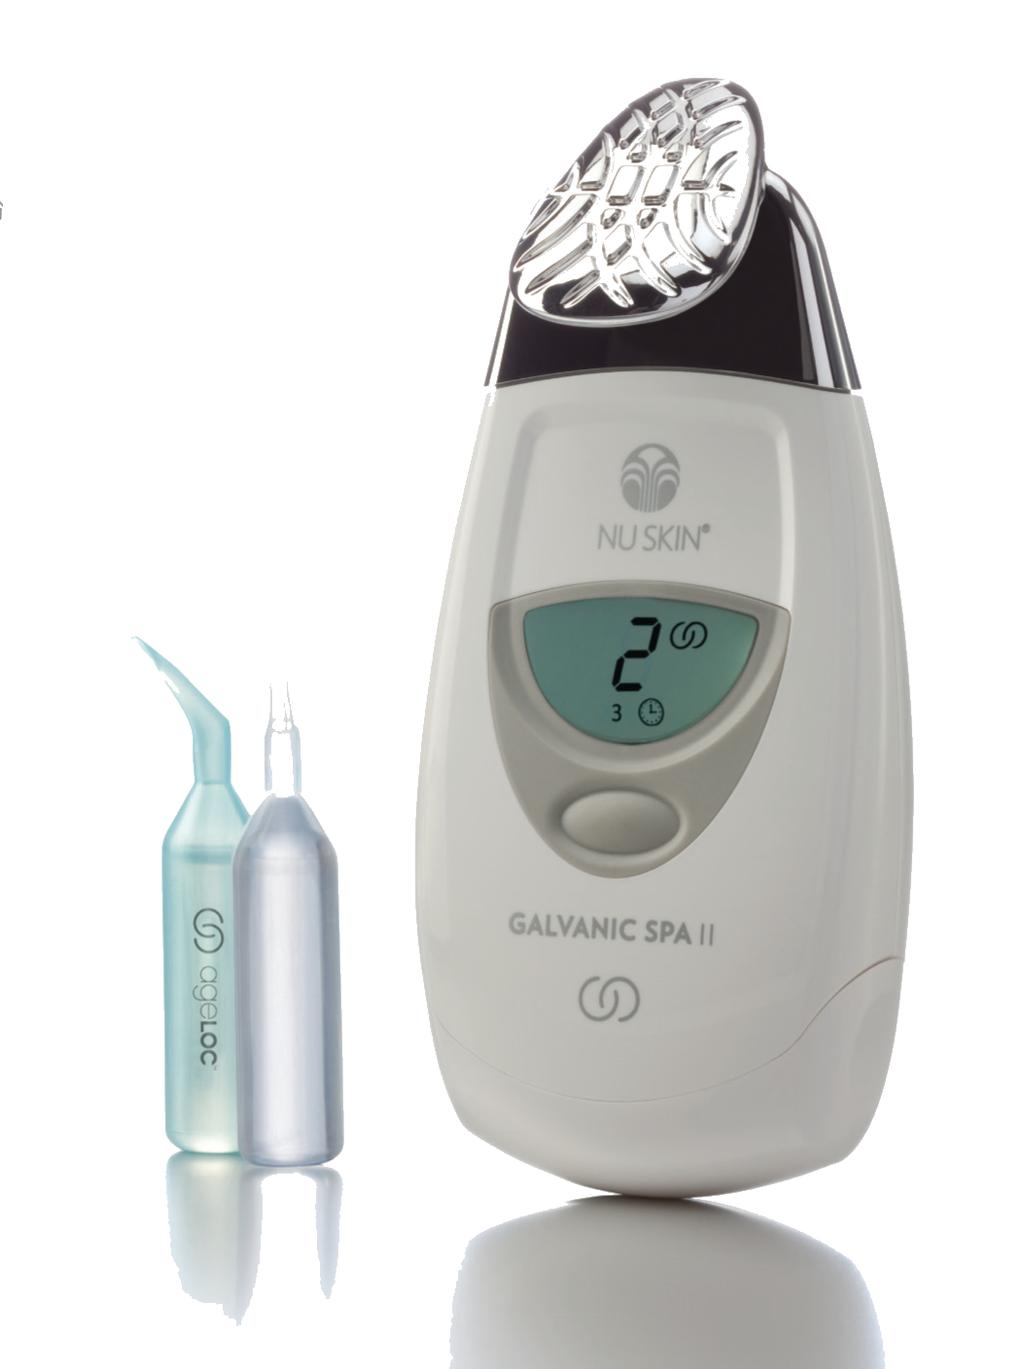 ageloc%galvanic%spa% Increases absorption of skin care